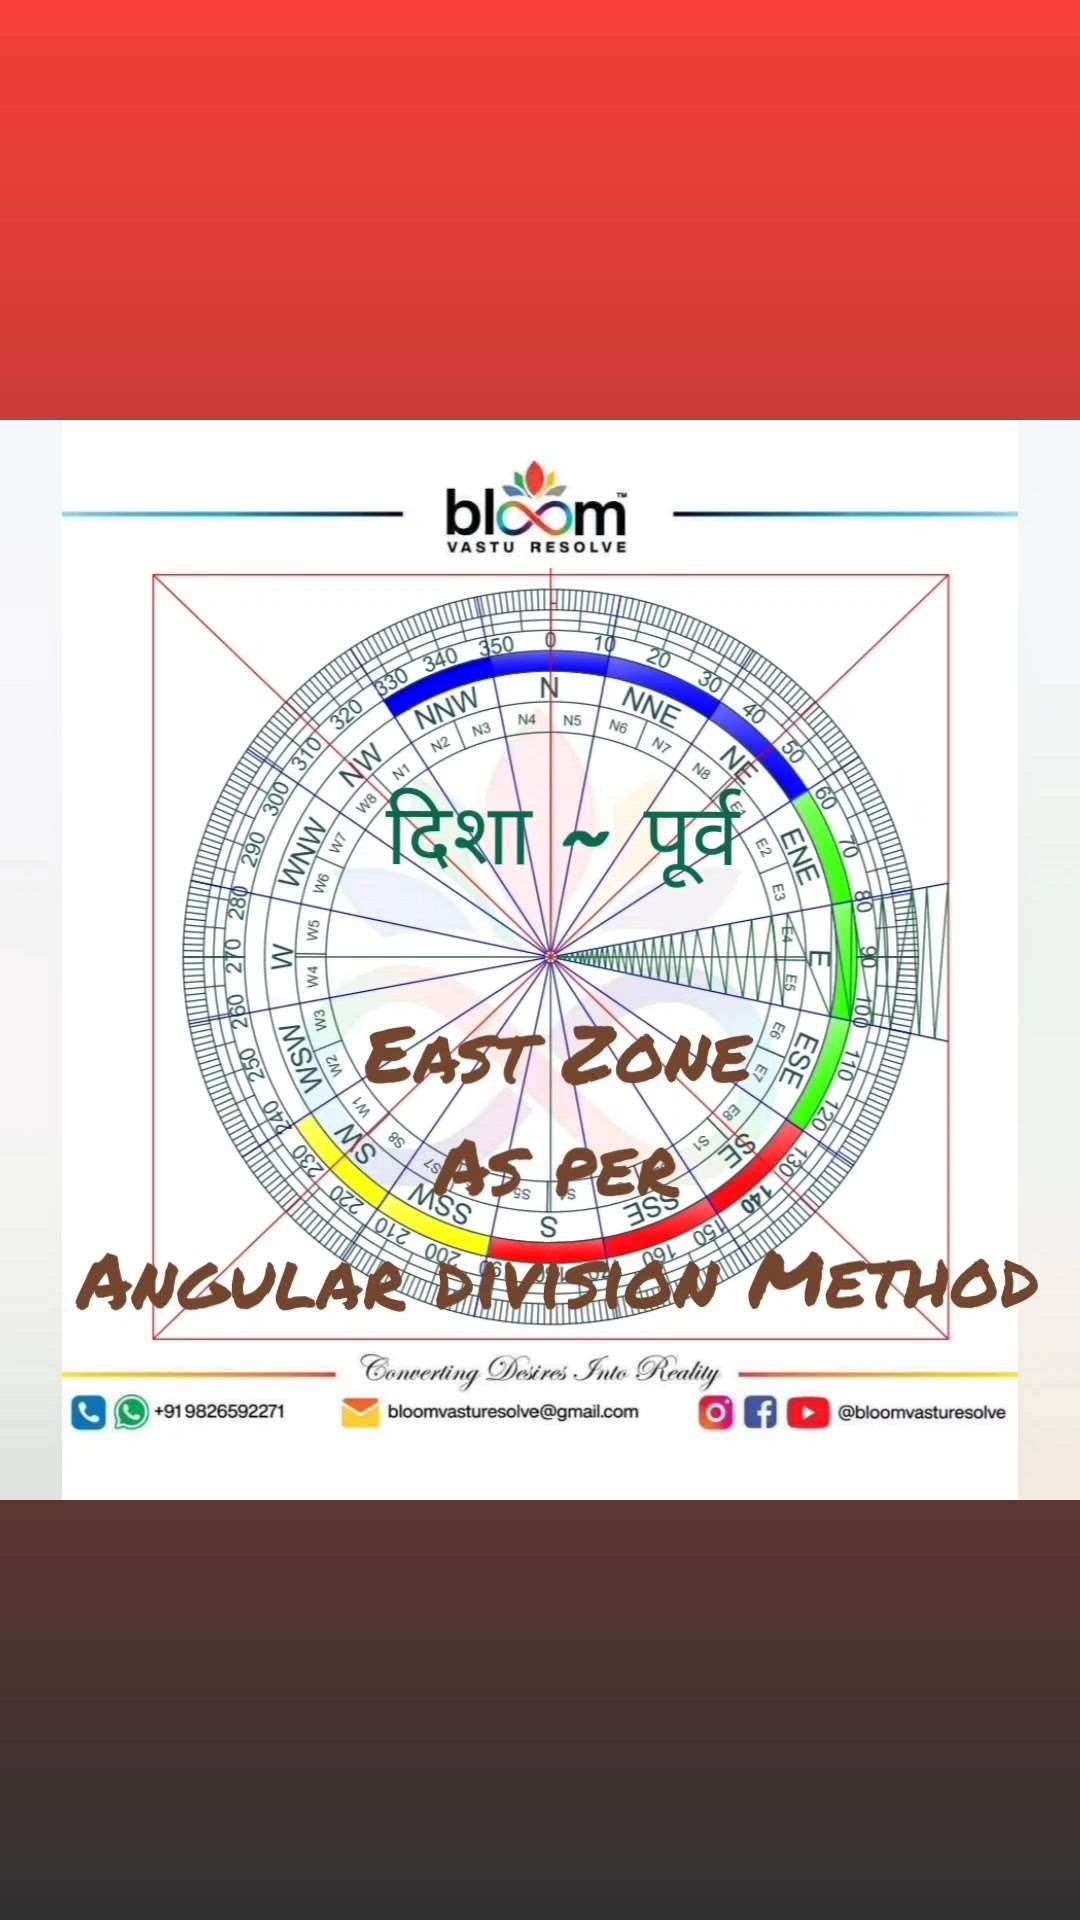 Your queries and comments are always welcome.
For more Vastu please follow @bloomvasturesolve
on YouTube, Instagram & Facebook
.
.
For personal consultation, feel free to contact certified MahaVastu Expert MANISH GUPTA through
M - 9826592271
Or
bloomvasturesolve@gmail.com

#vastu 
#mahavastu #mahavastuexpert
#bloomvasturesolve
#eastzone 
#vastulogy 
#socialconnection